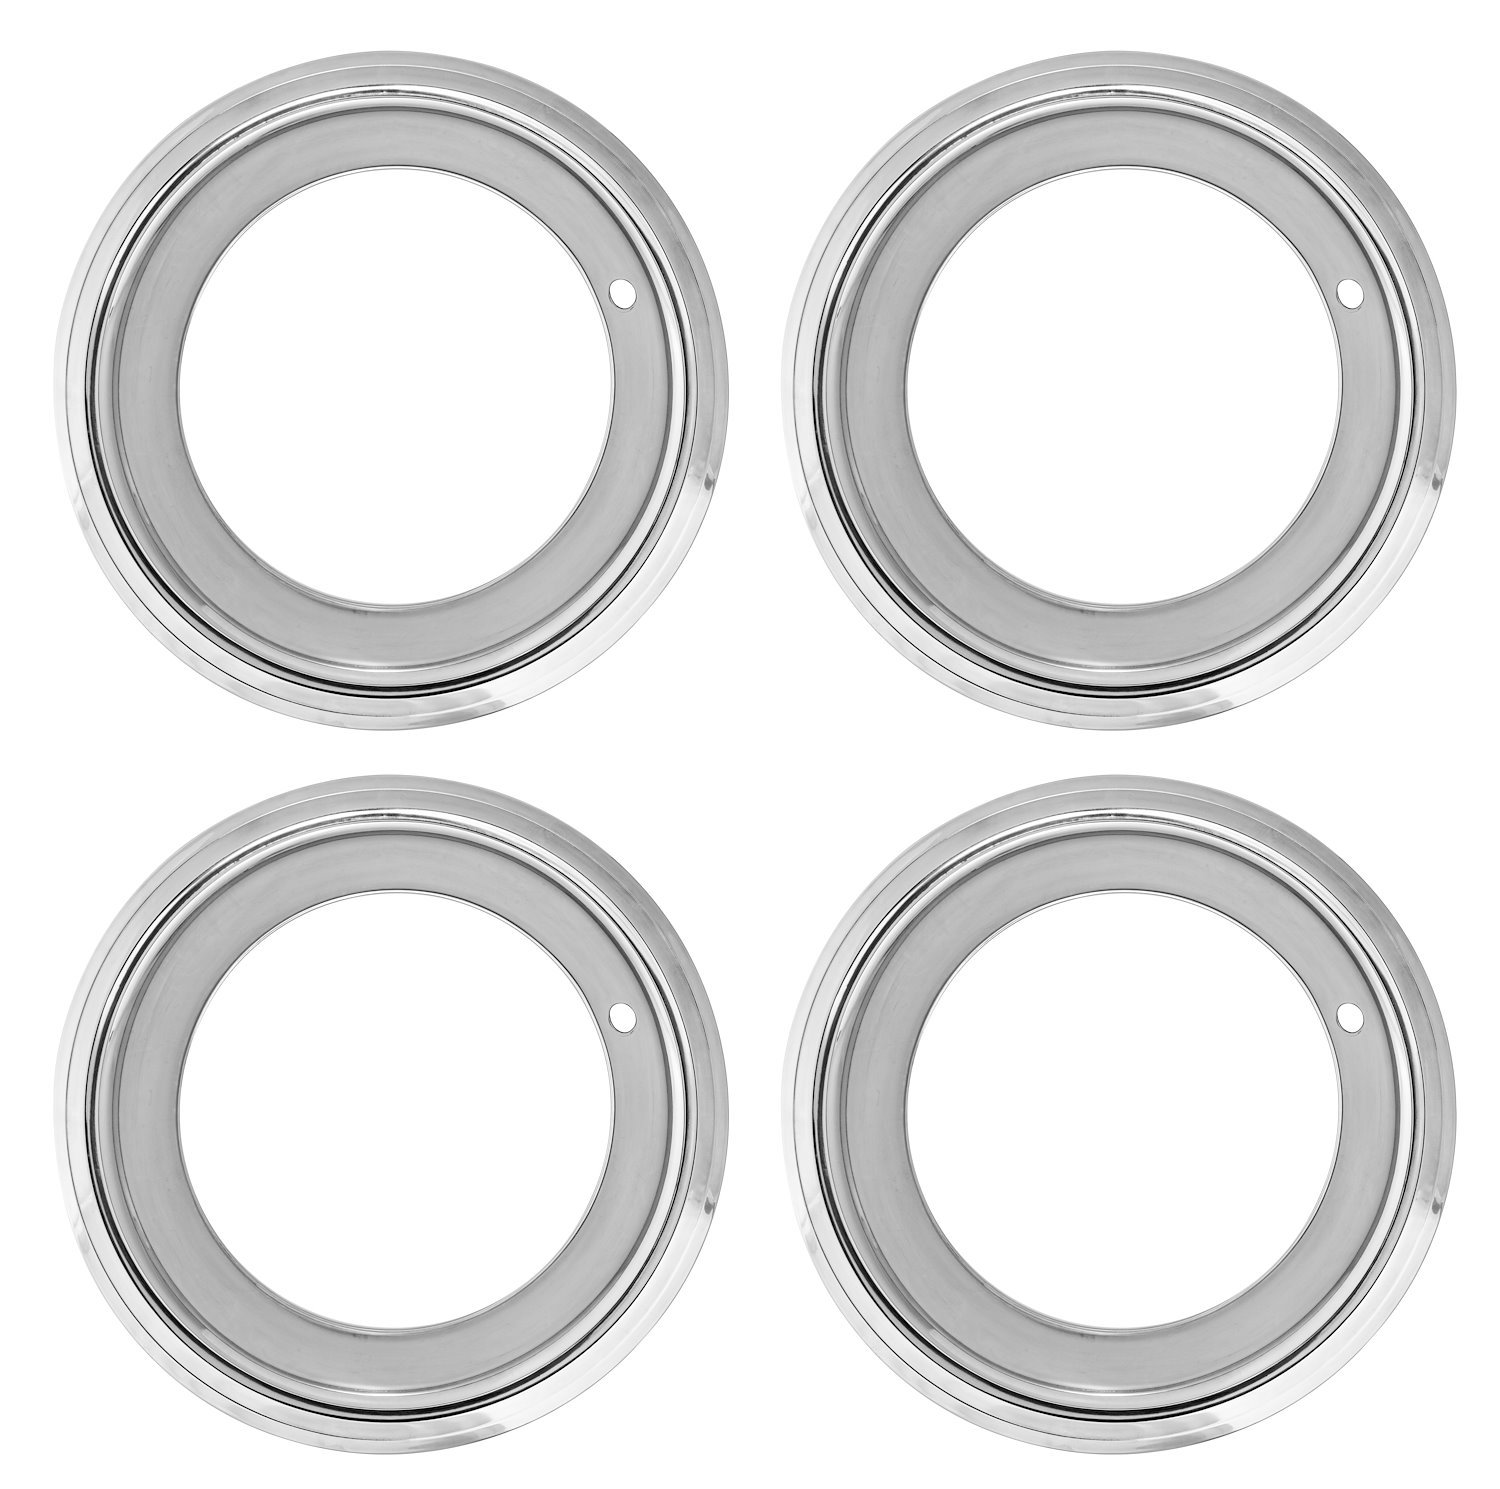 Rally Wheel Trim Ring Set for JEGS 15 in. Rally Wheels [4-Piece]